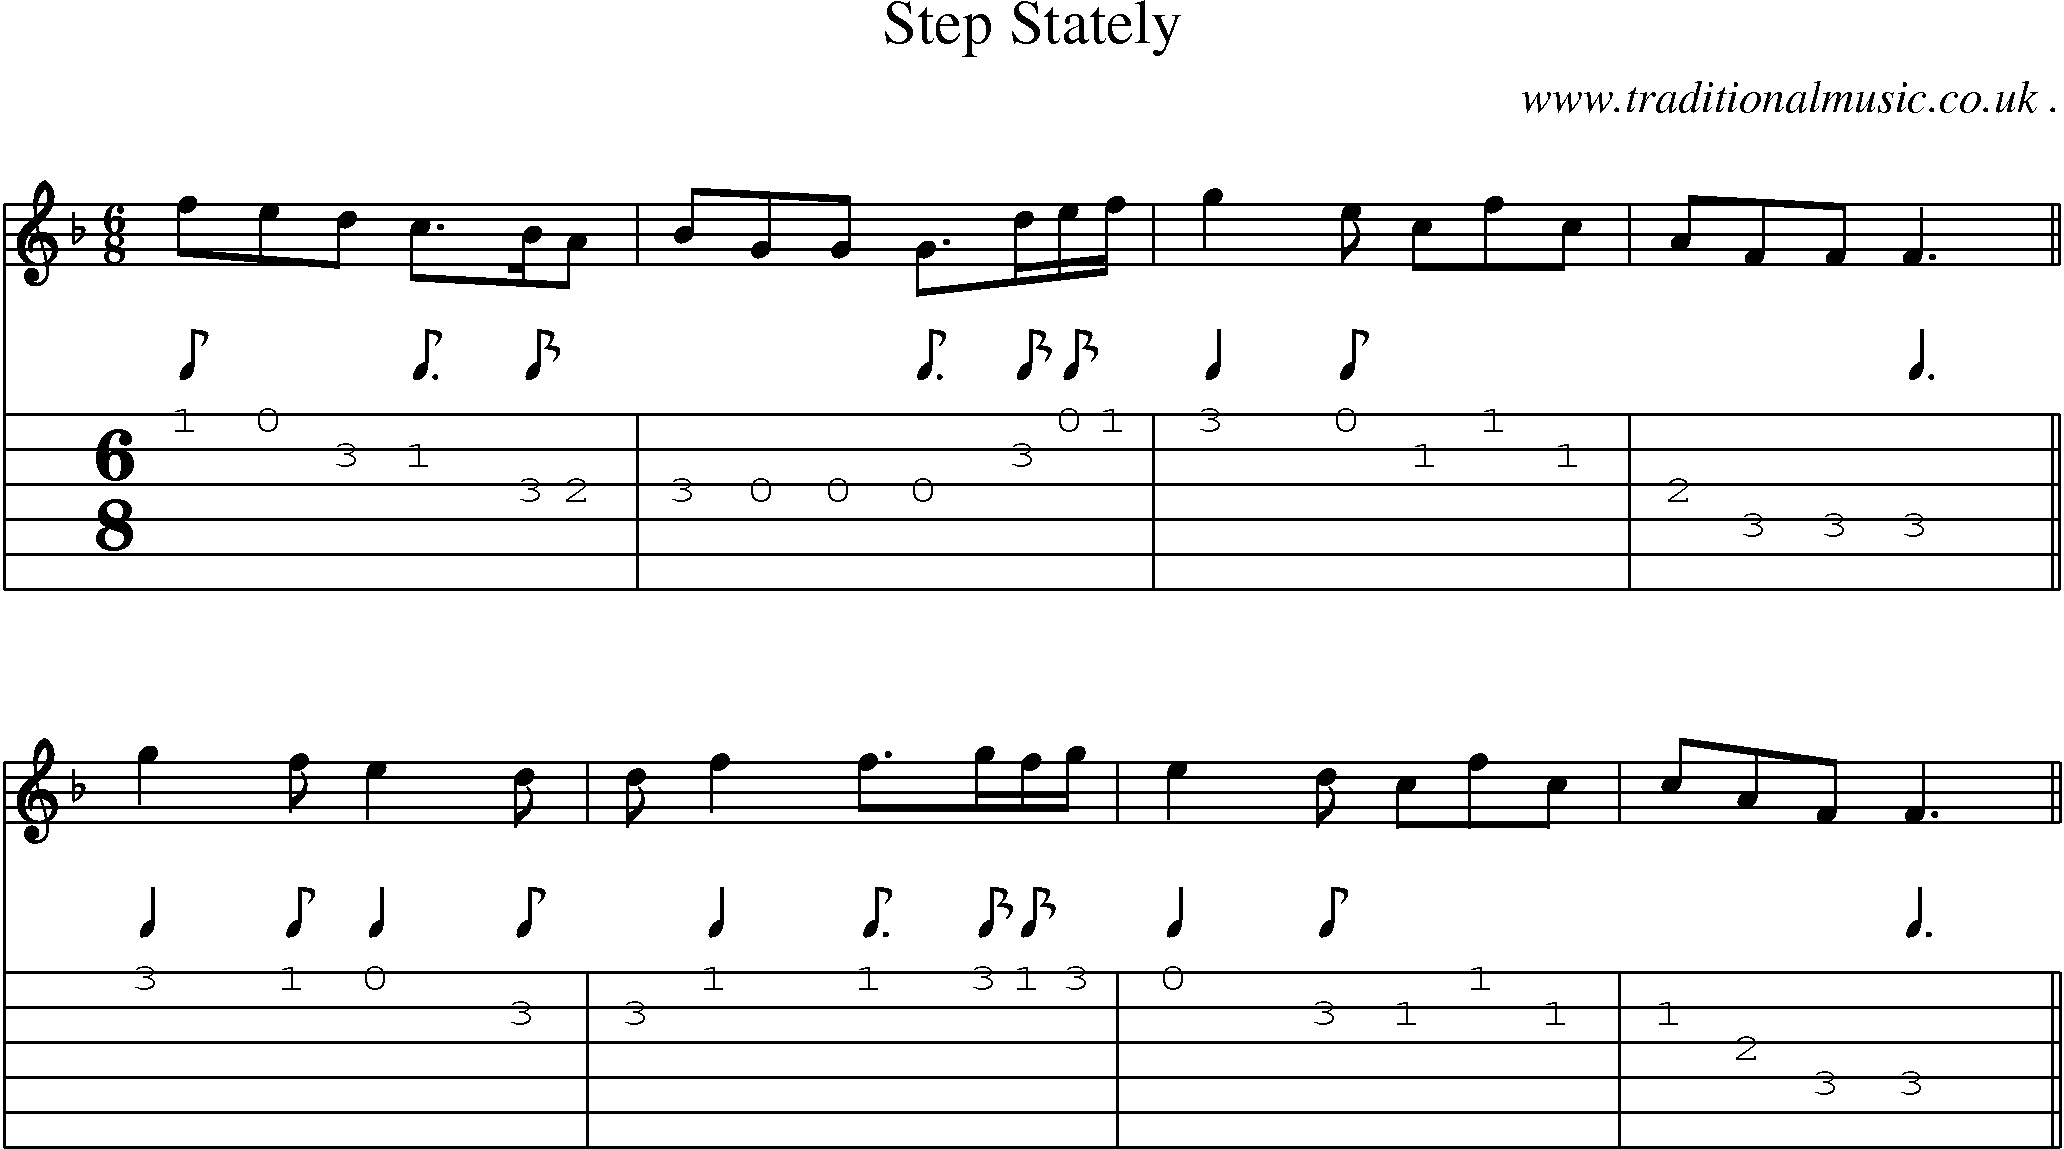 Sheet-Music and Guitar Tabs for Step Stately